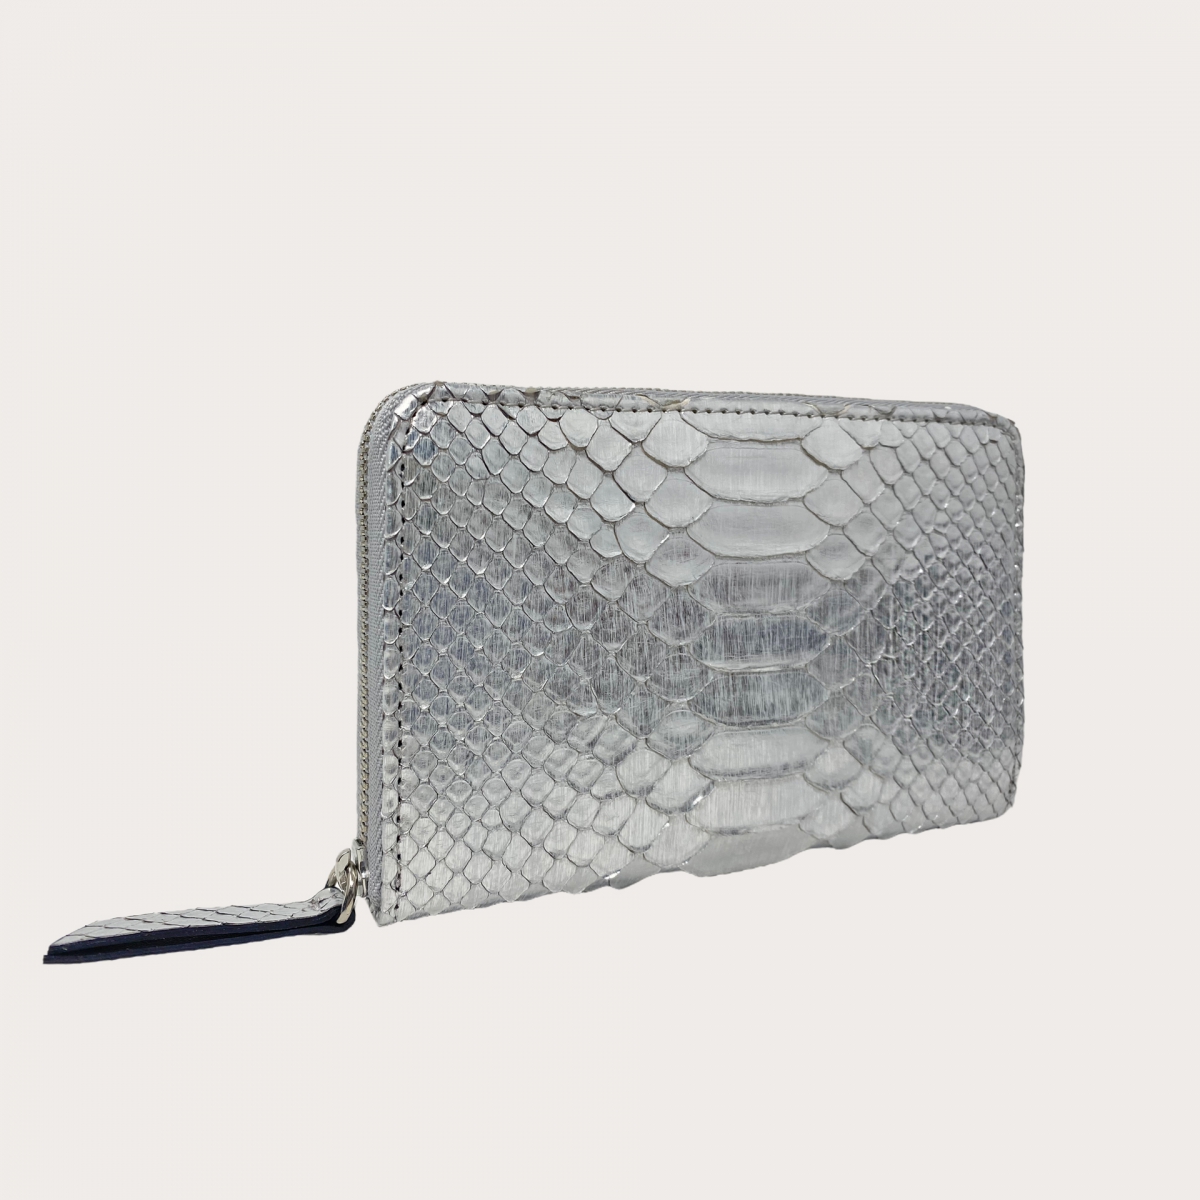 BRUCLE Women's compact wallet in python, hand-painted silver